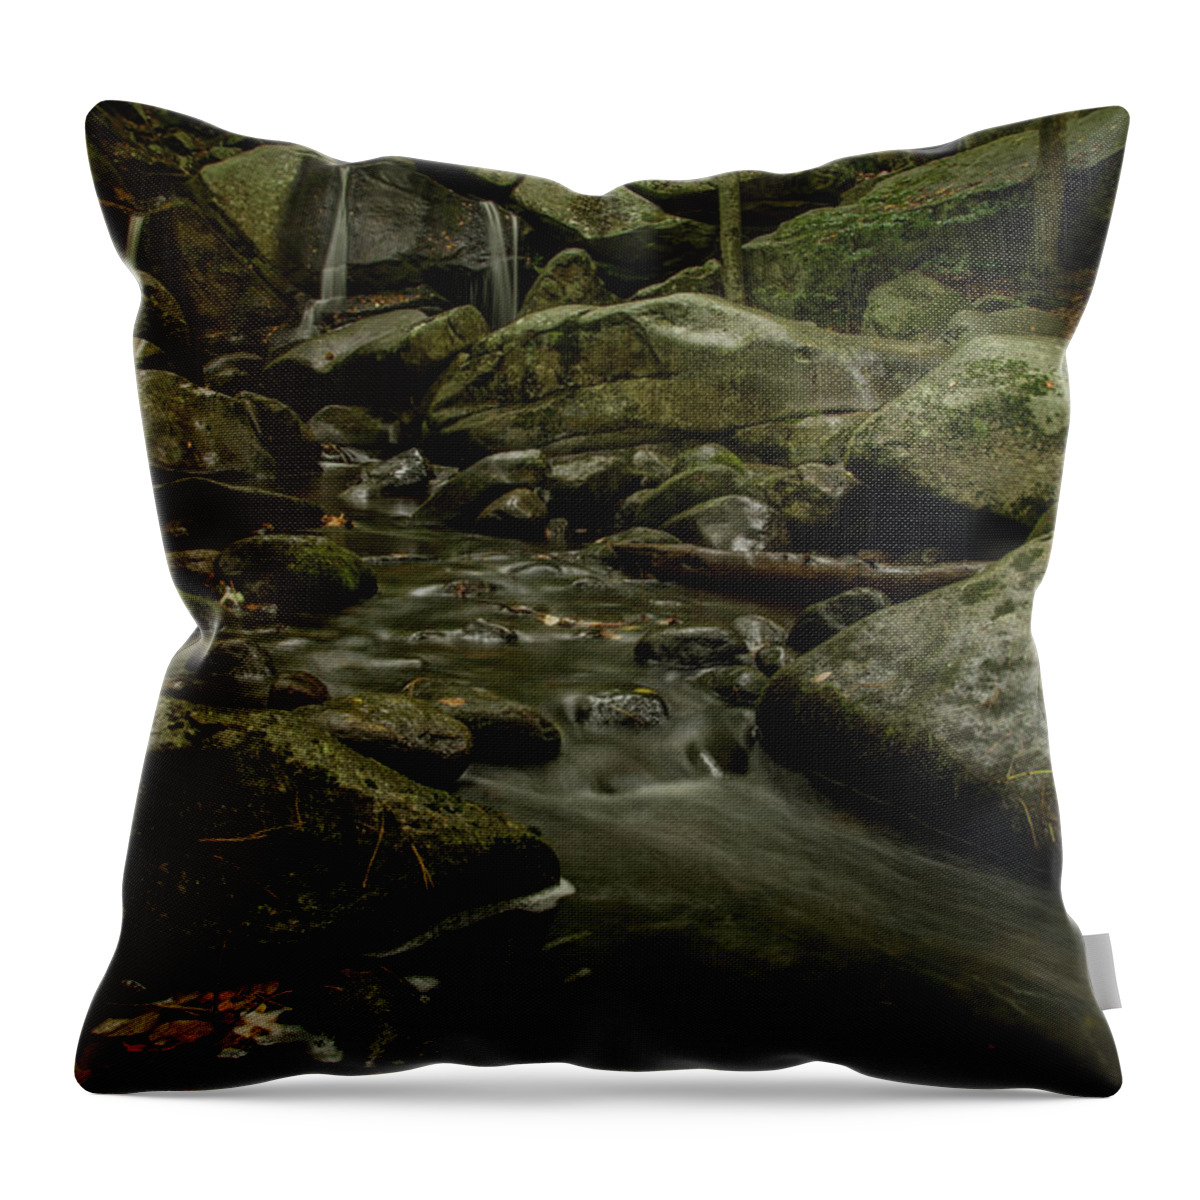 Trap Falls Throw Pillow featuring the photograph Trap Falls by Gales Of November